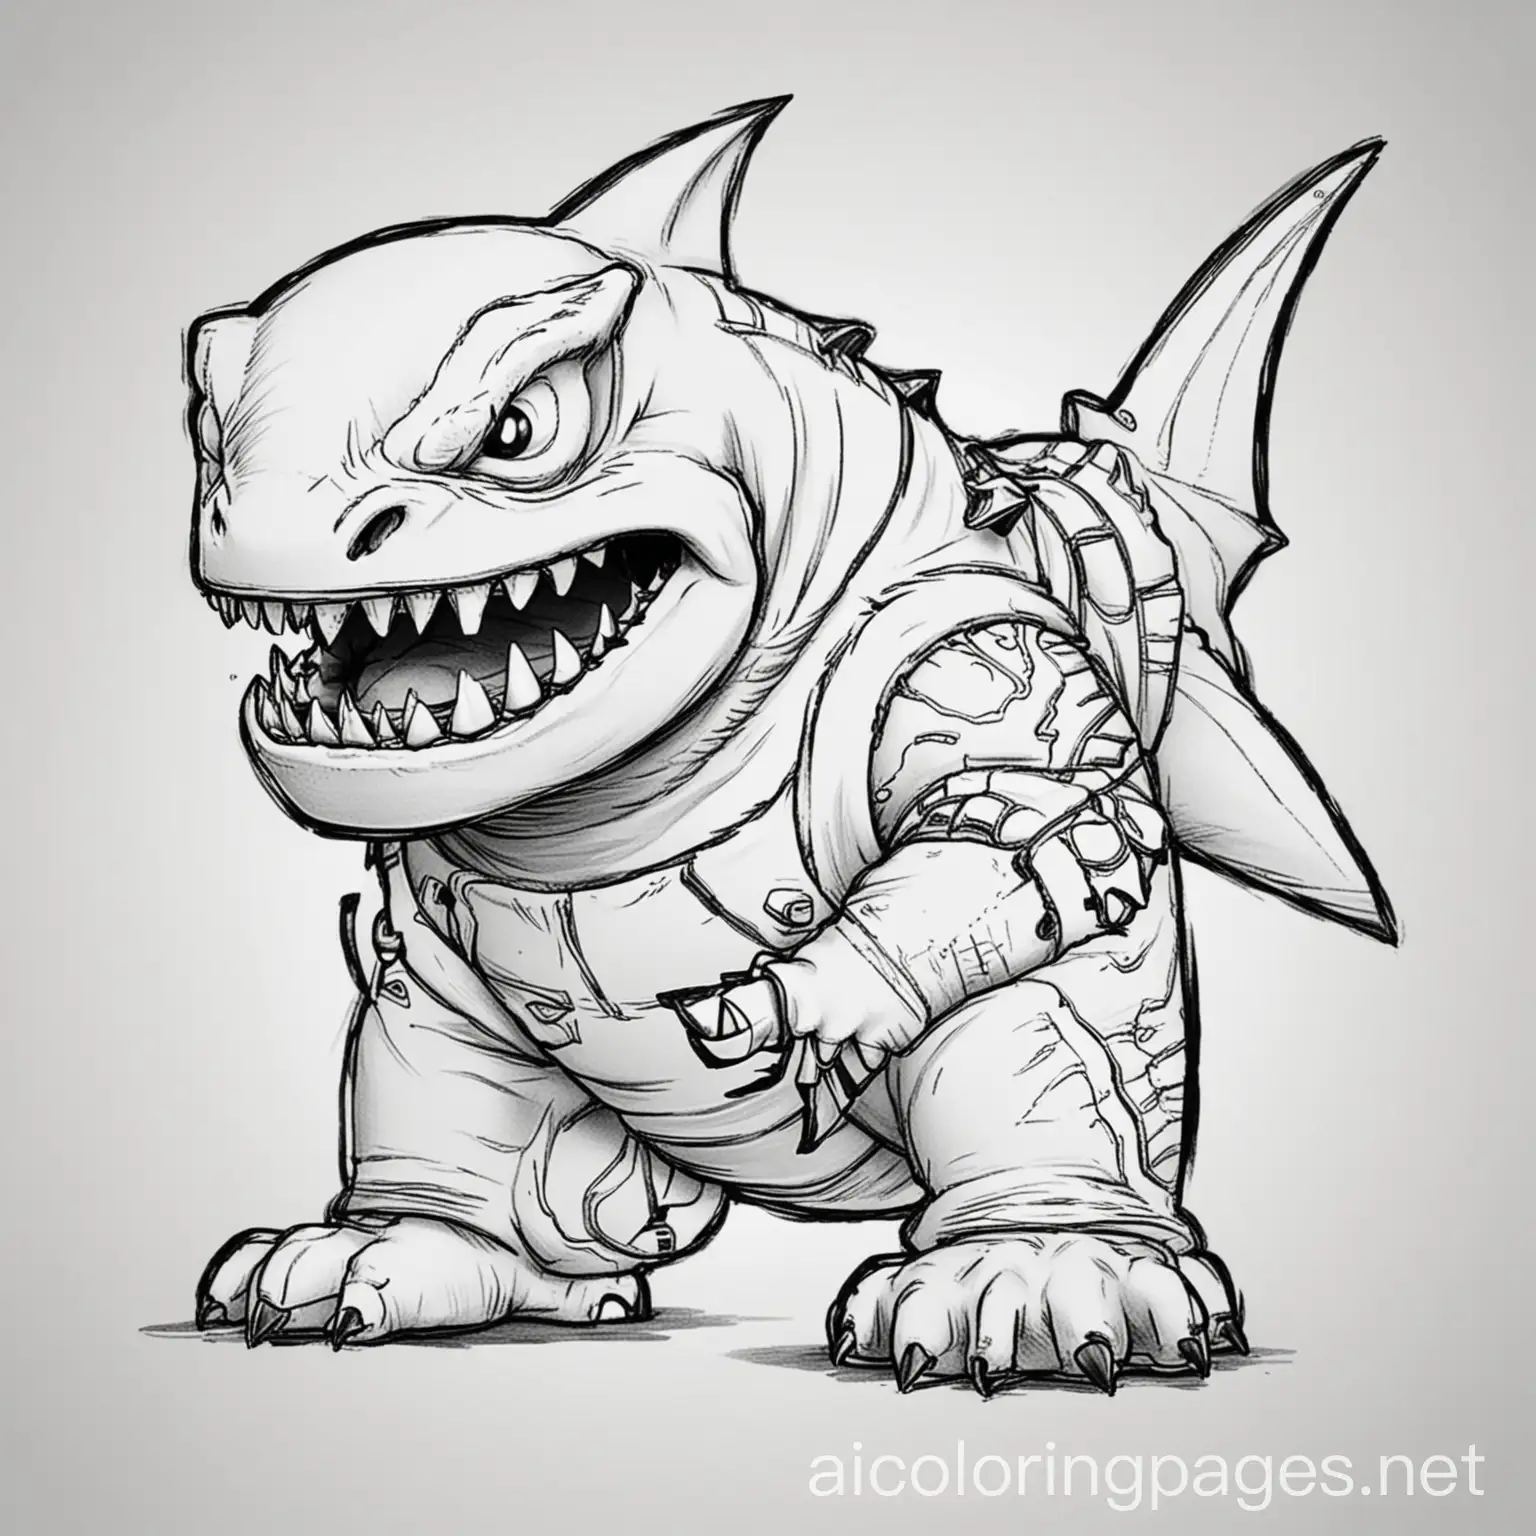 Street-Sharks-Toy-Easy-Coloring-Page